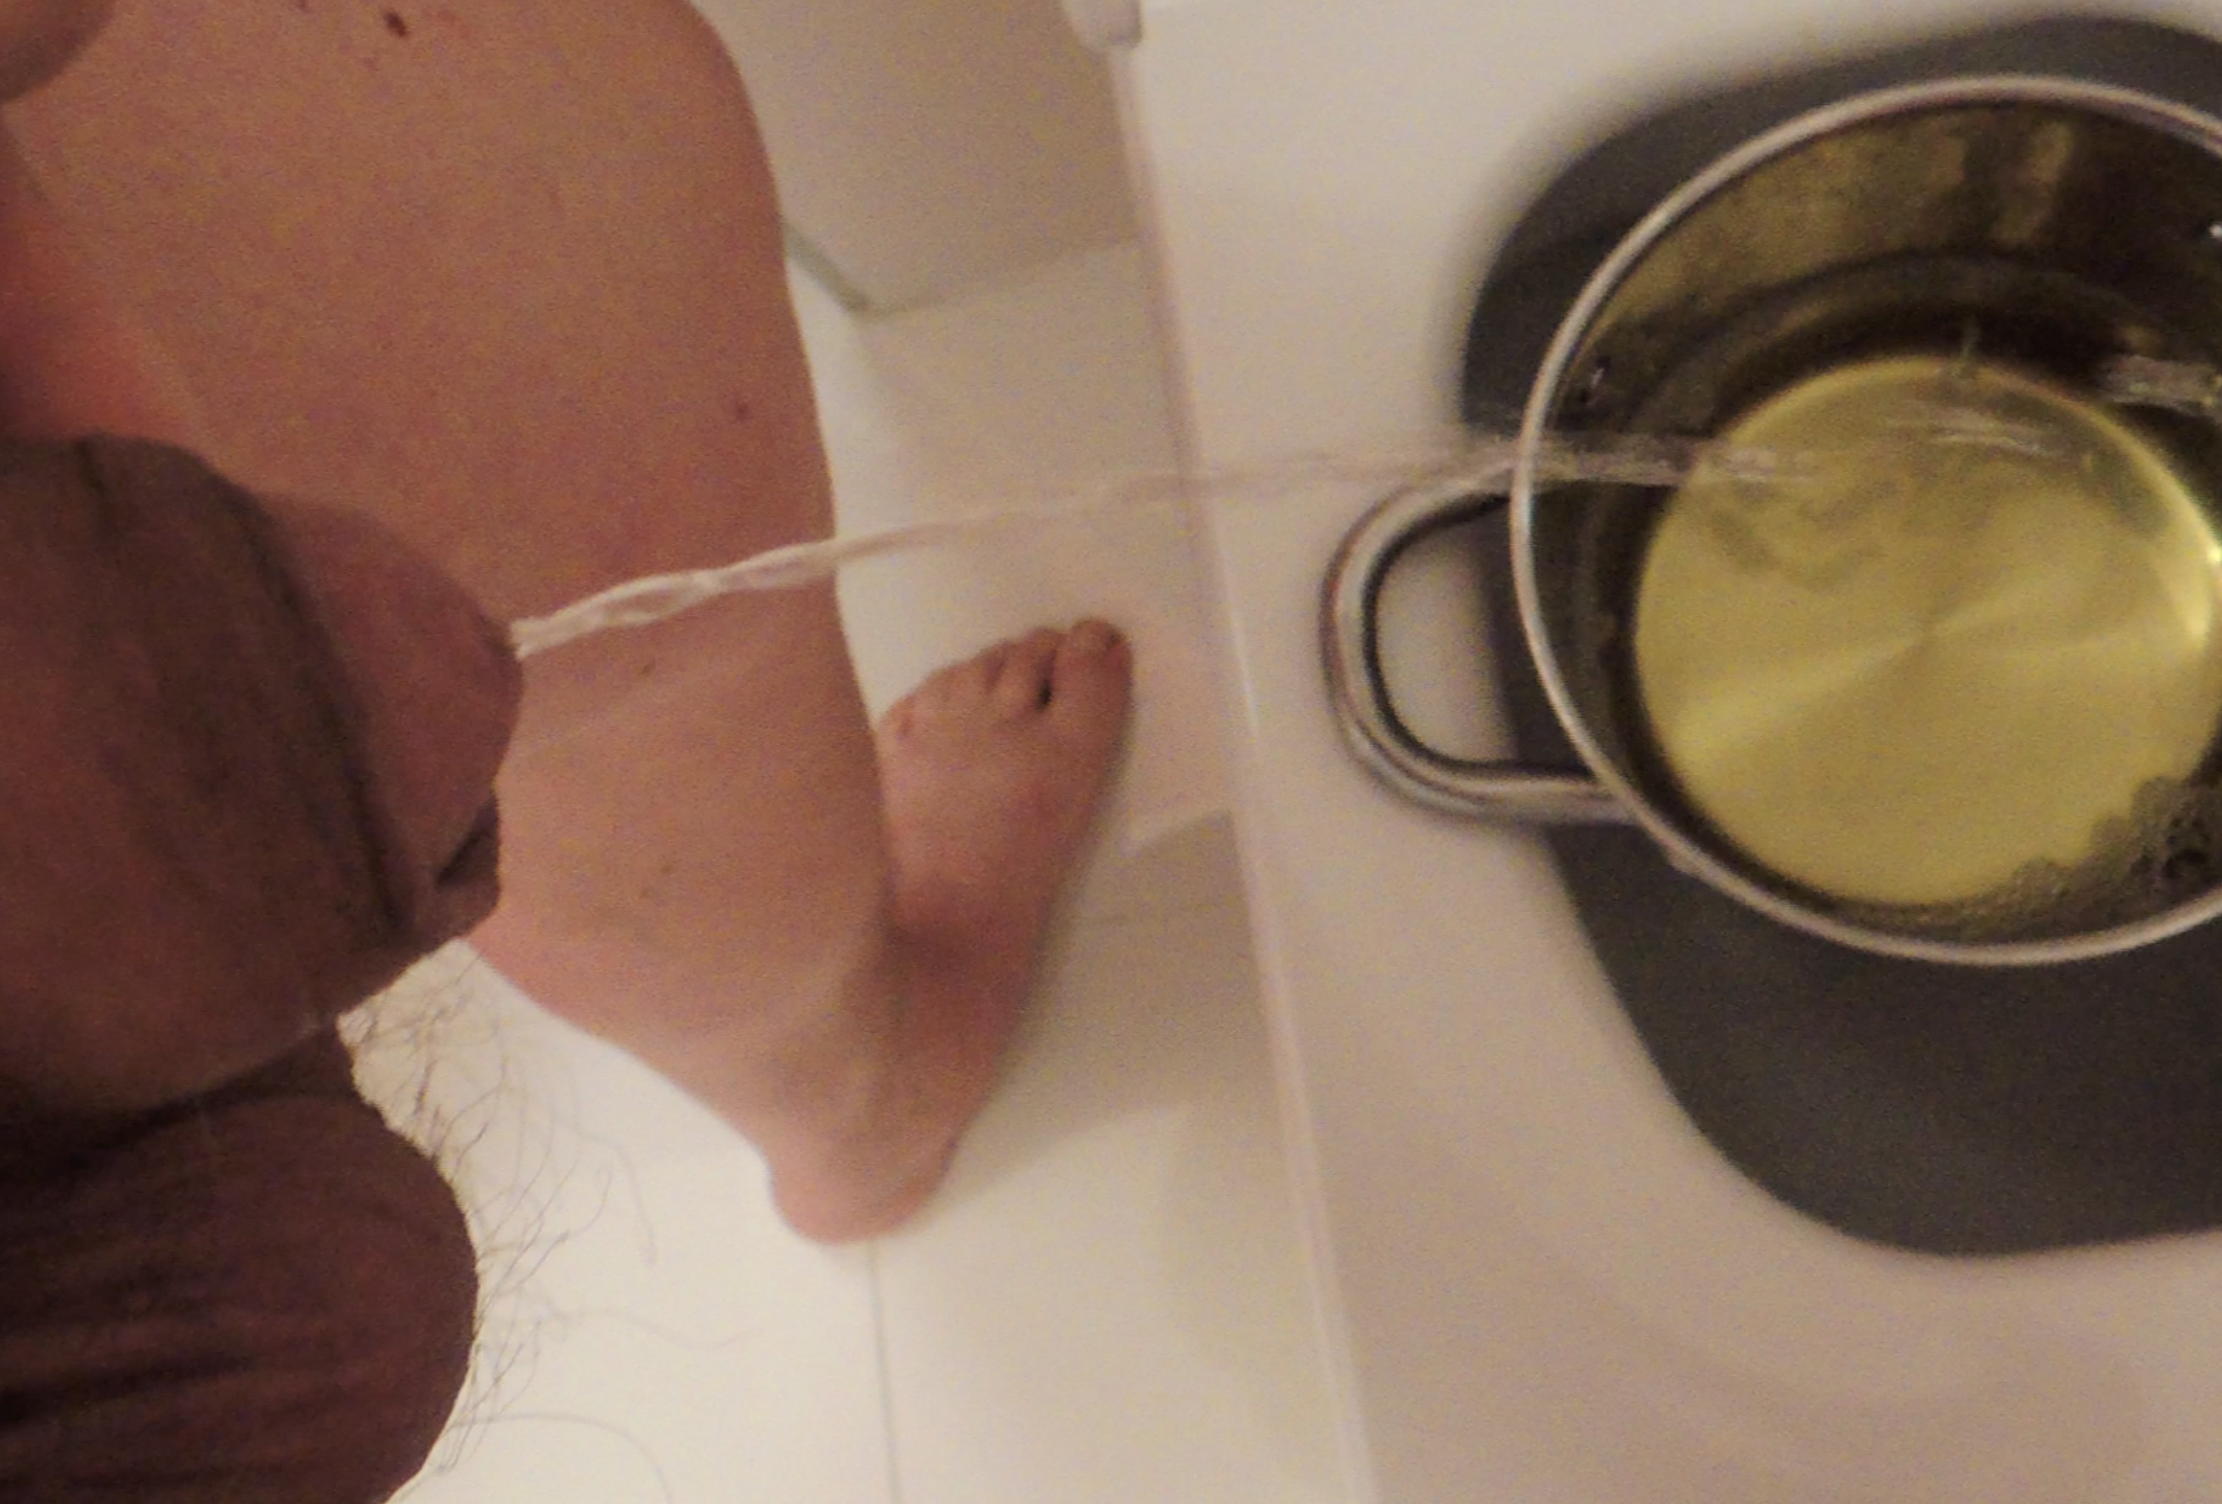 Me pissing in buckets, condoms, toilets with foreskin teen d